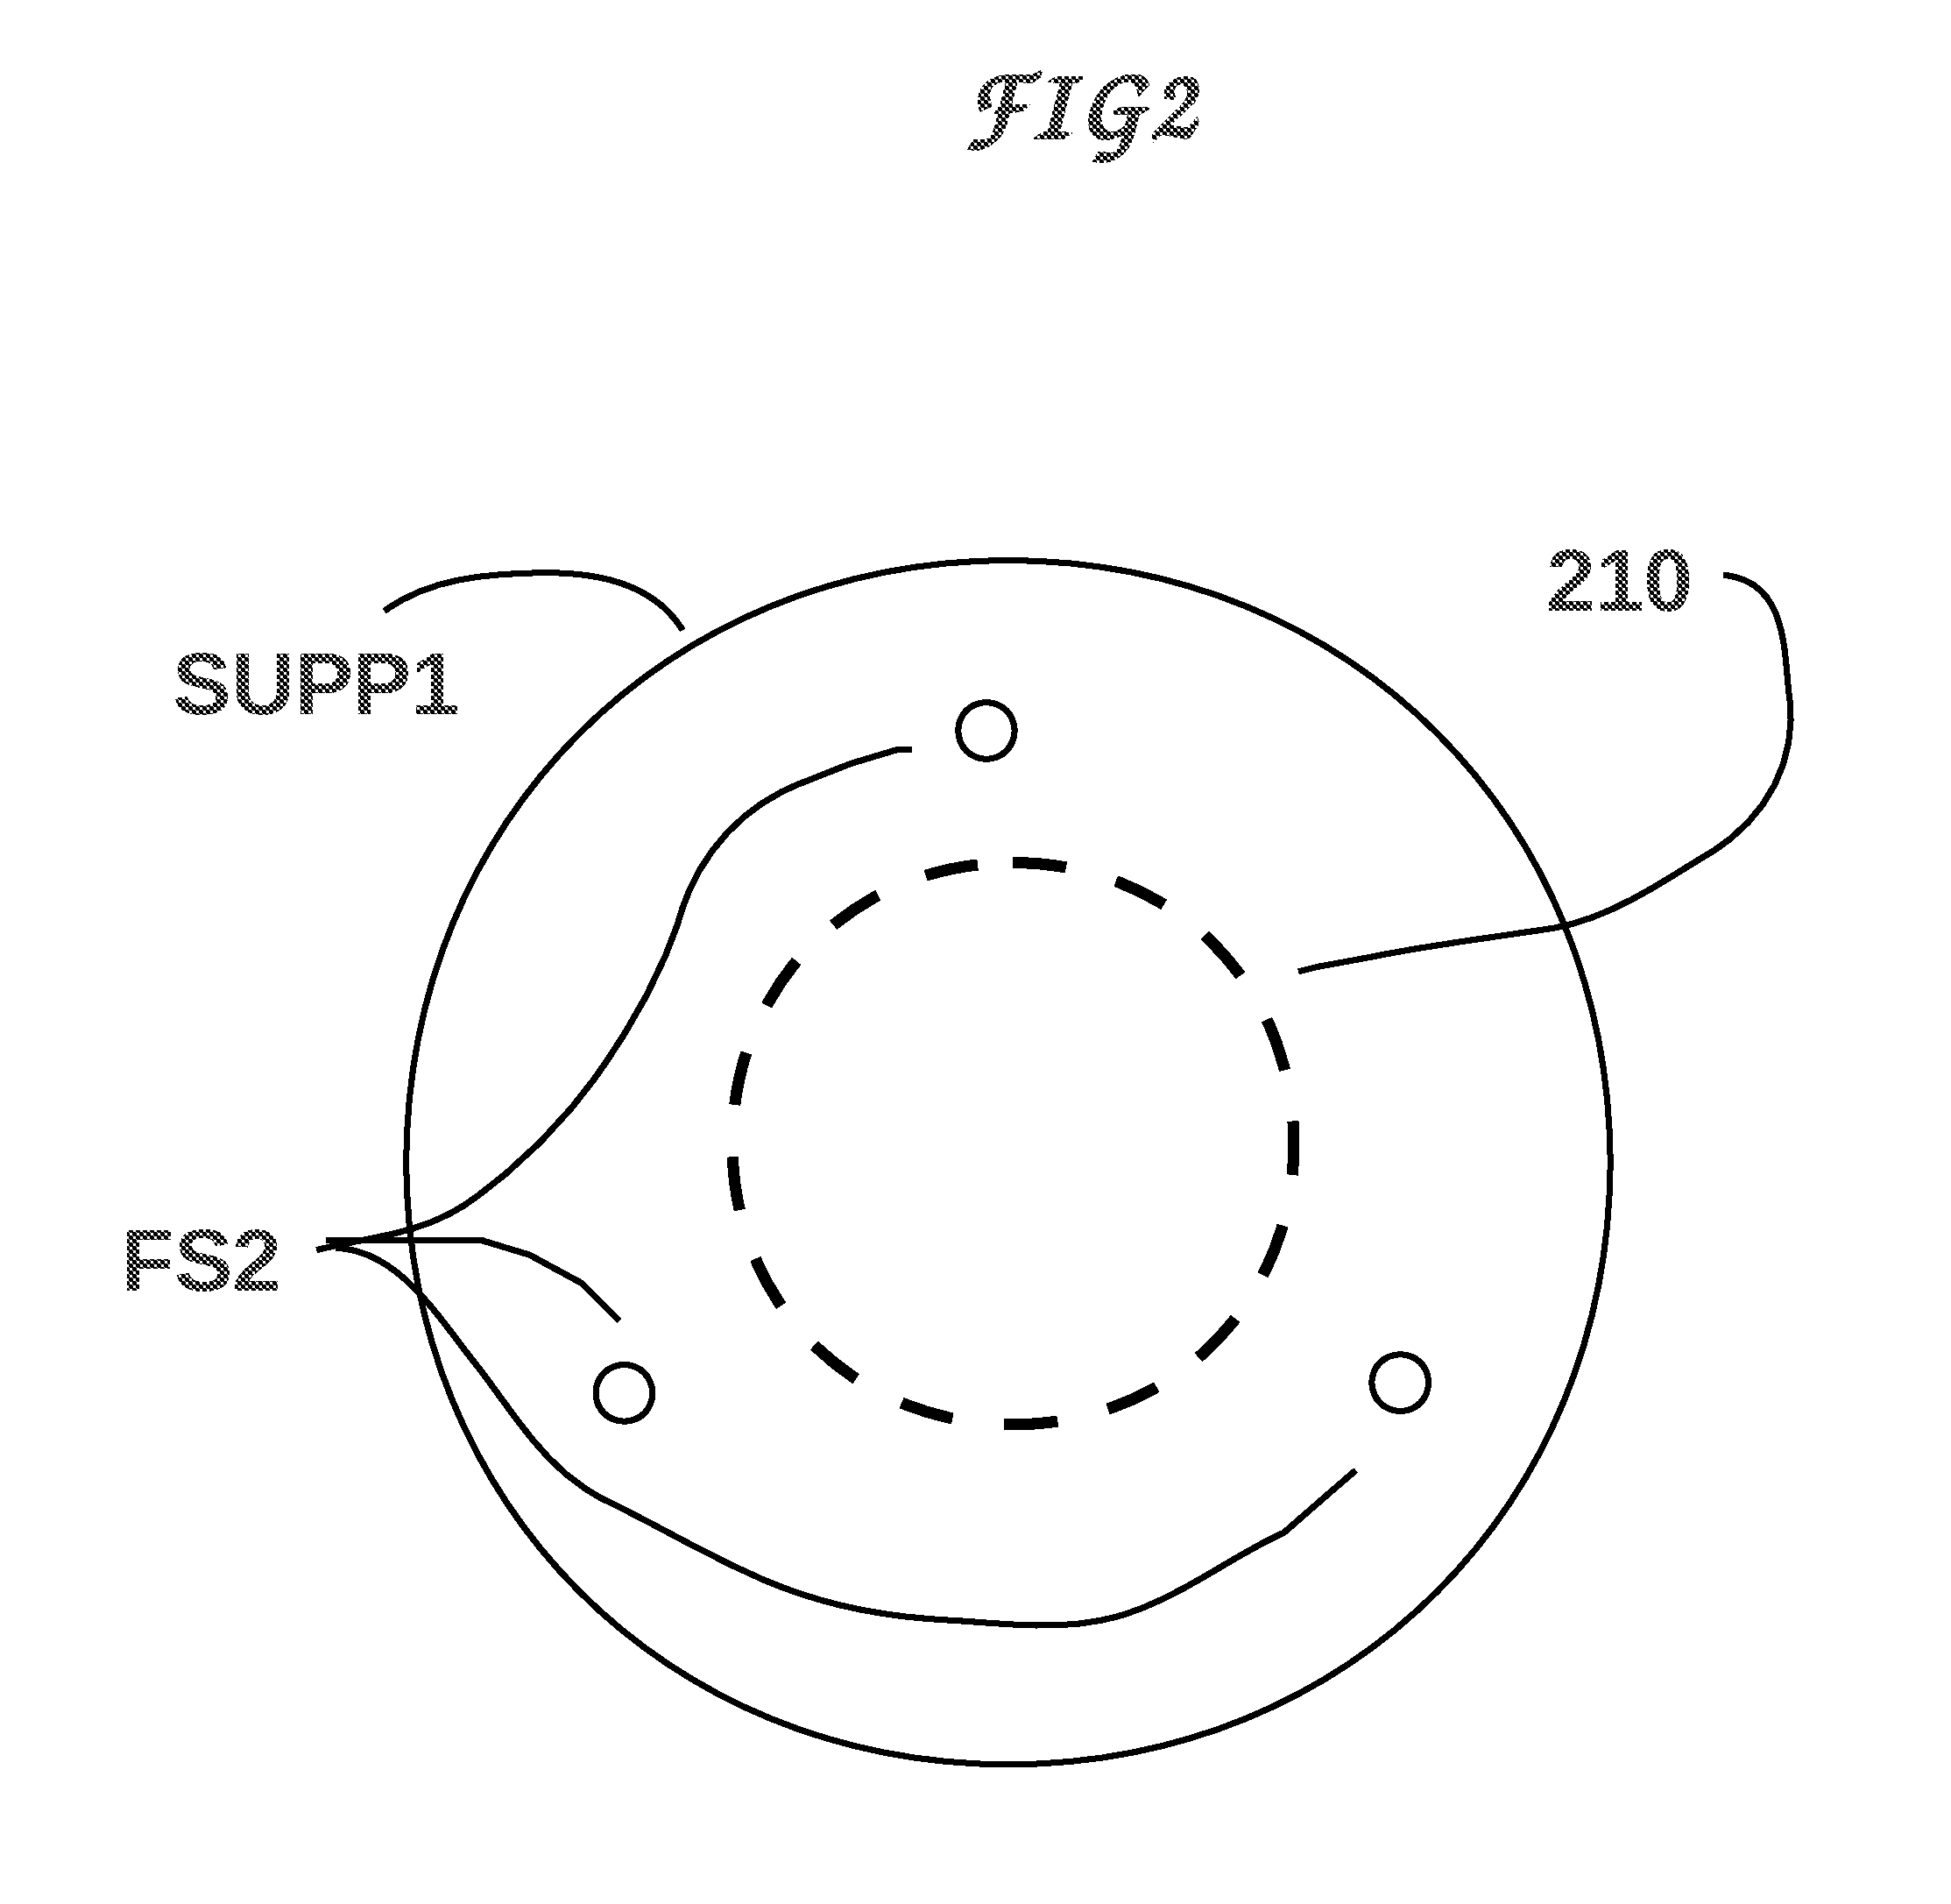 Device and means for adjusting the position of DBS brain and other neural and muscular implants